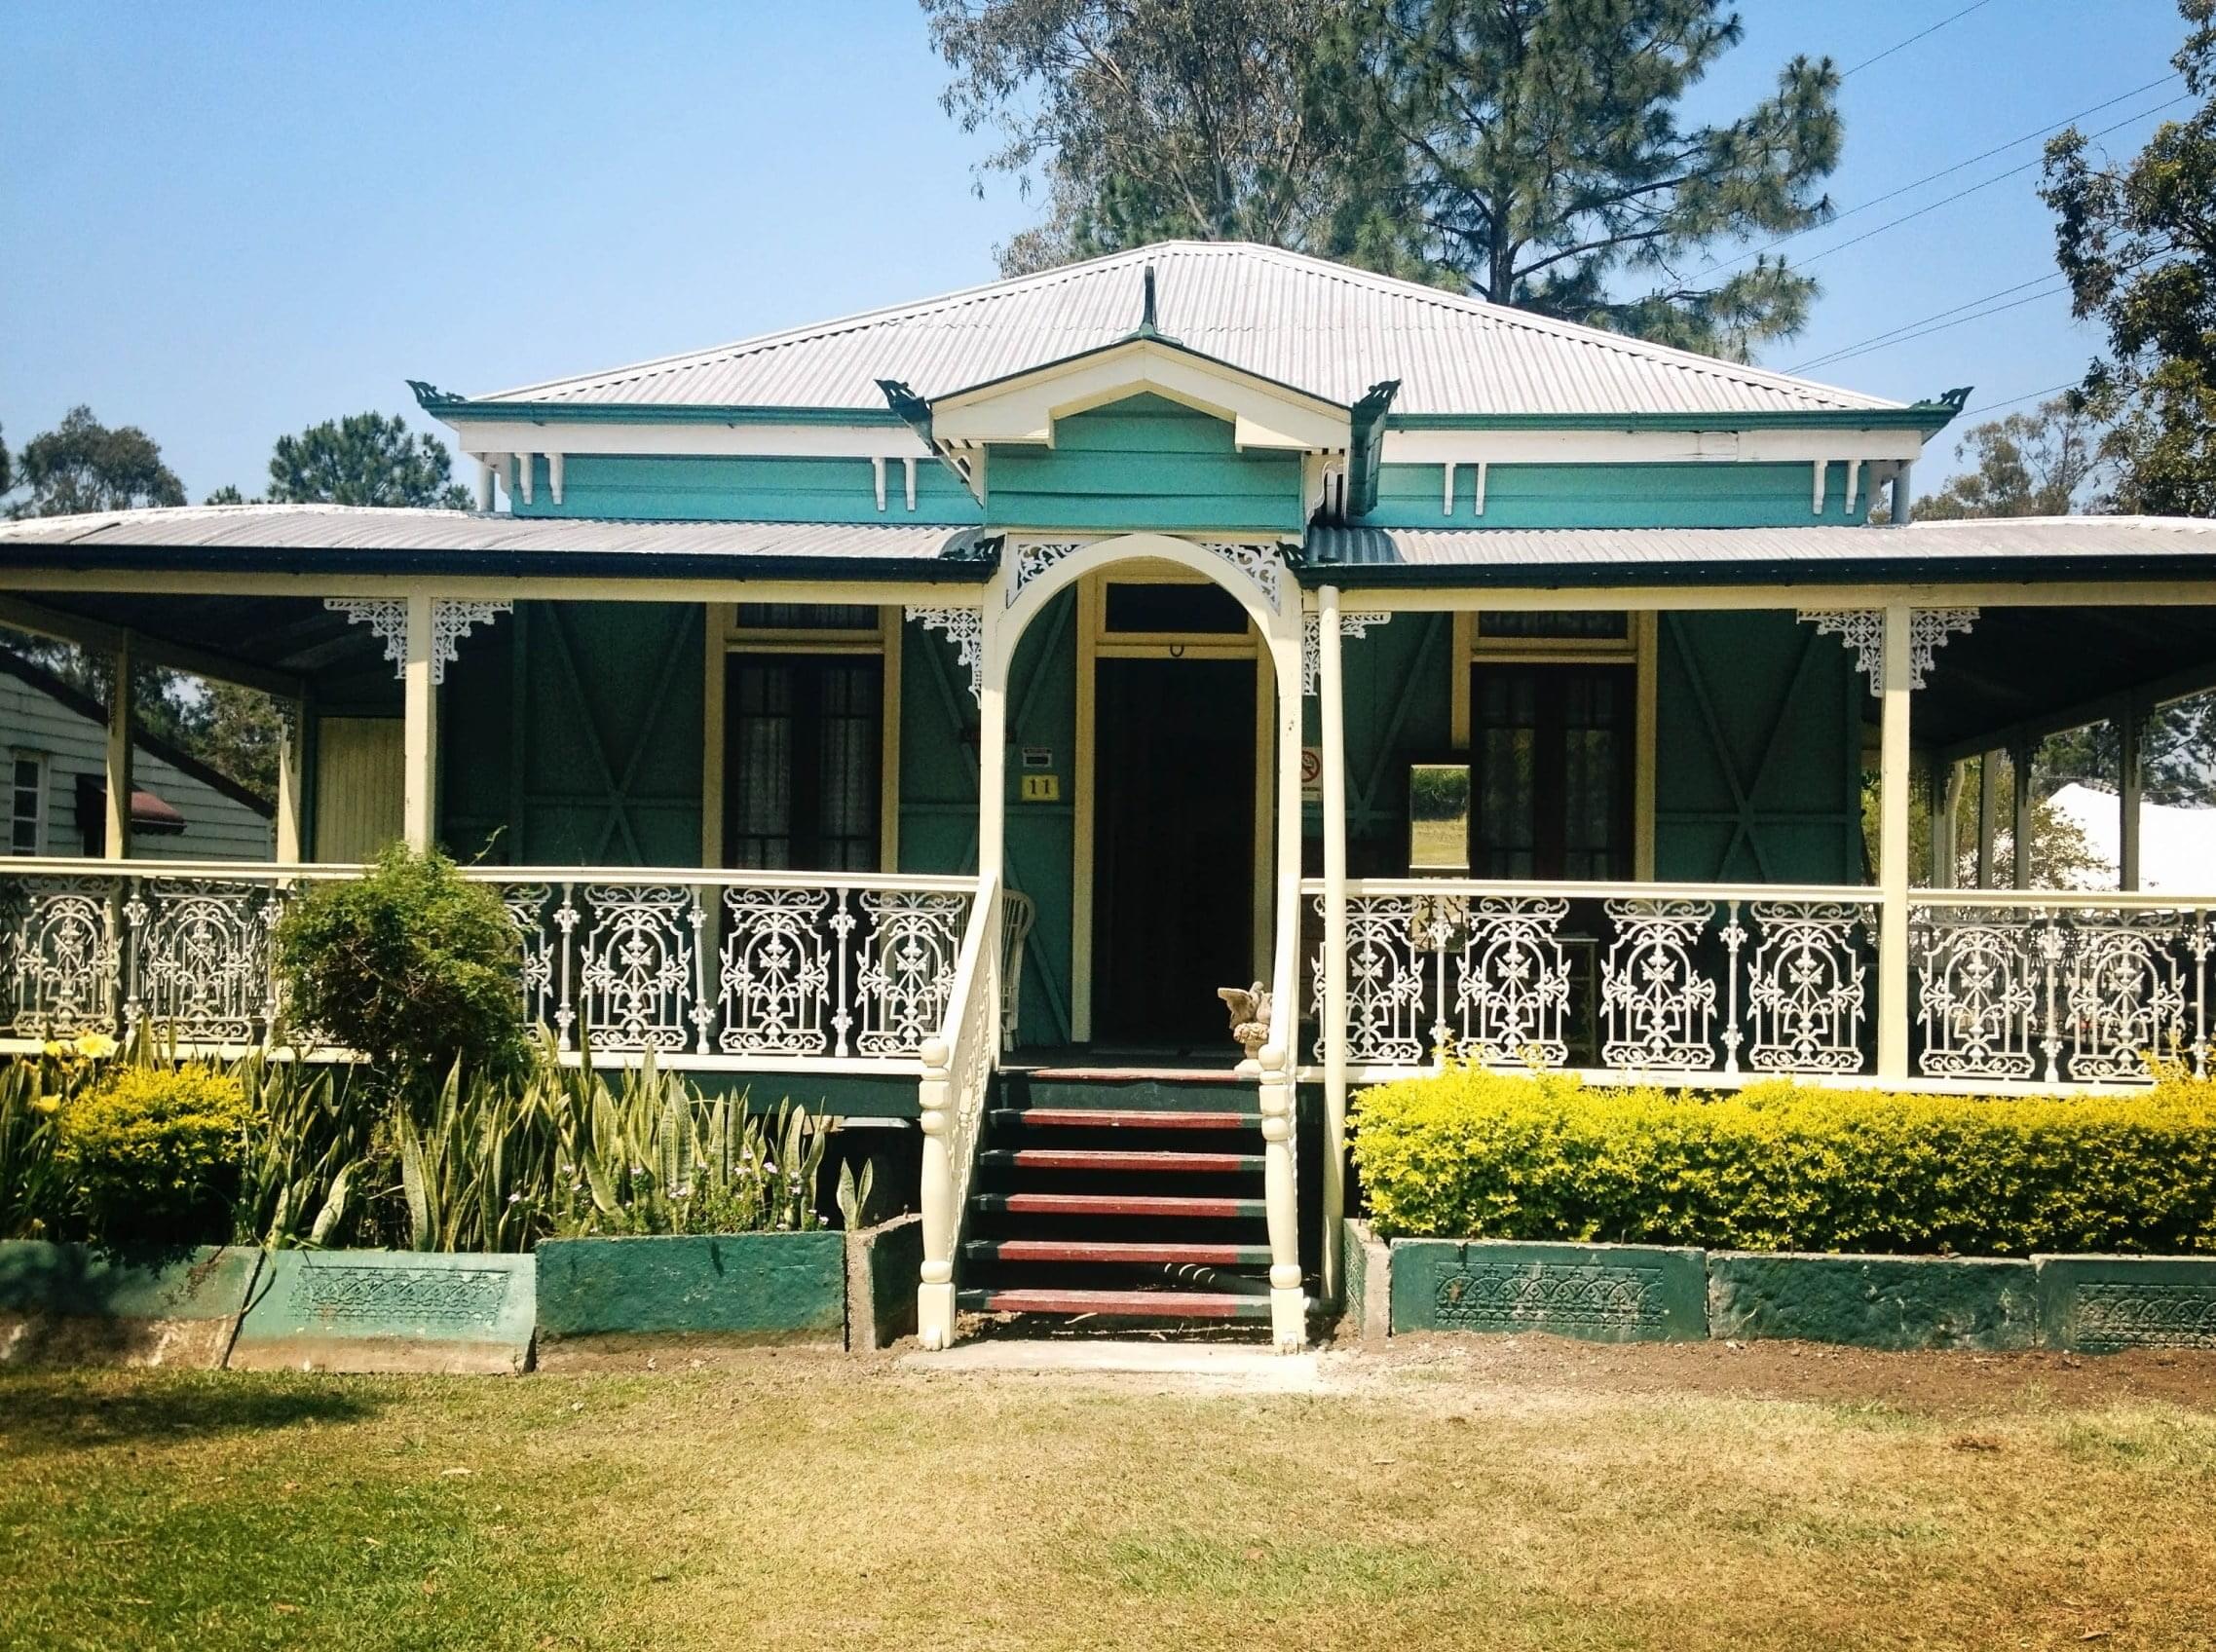 Welcome to the renowned Beenleigh Historical Village & Museum